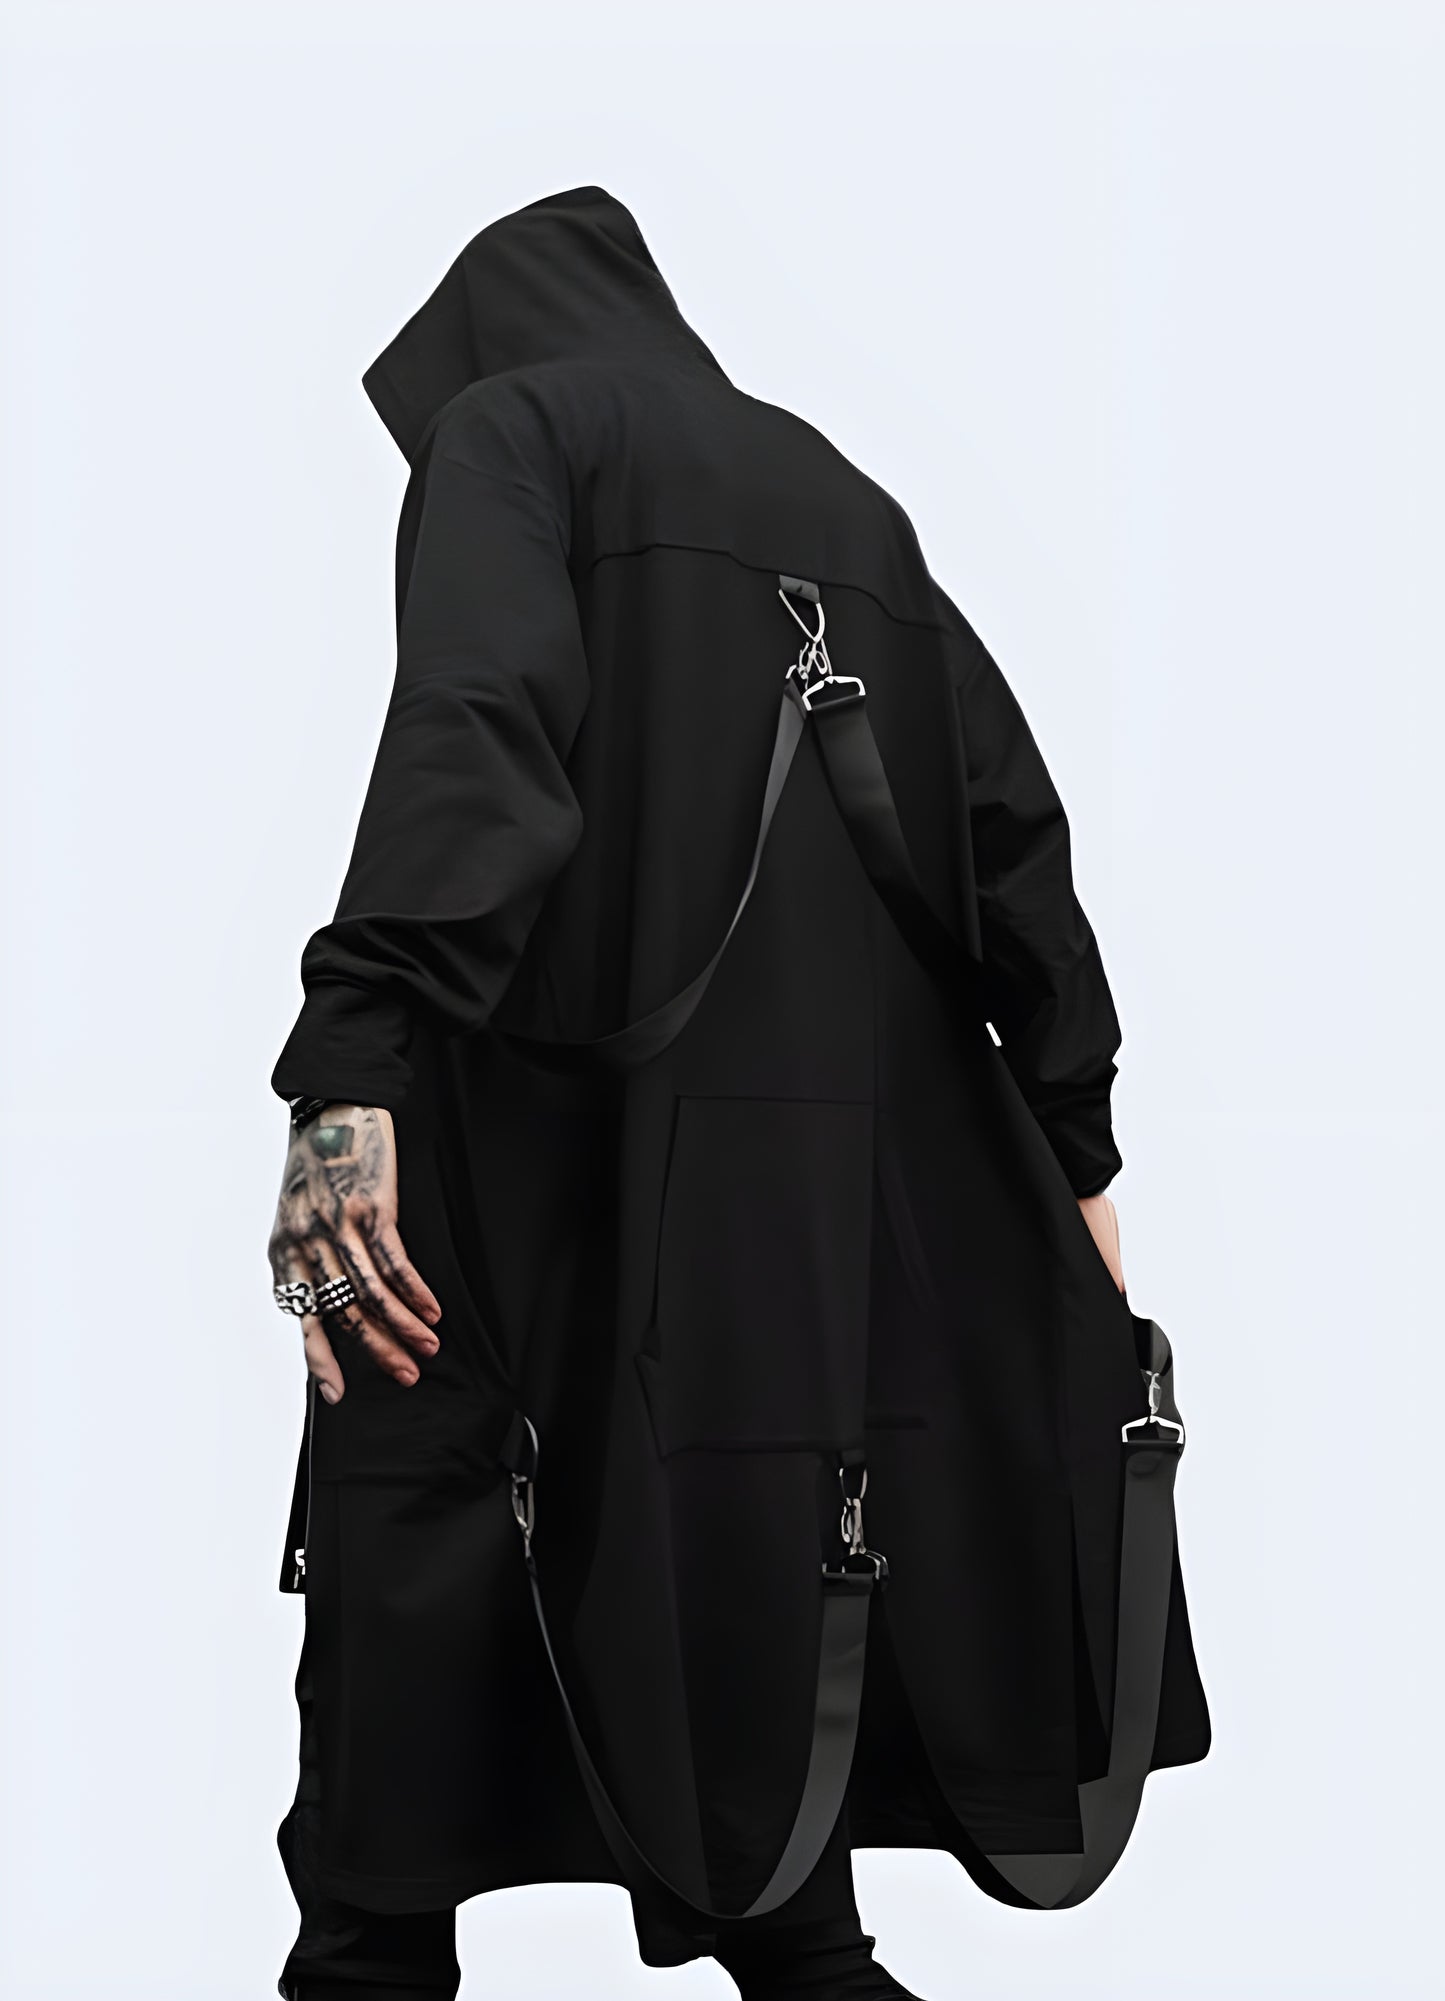 The long black straps attached by buckles at the shoulders futuristic cloak. 